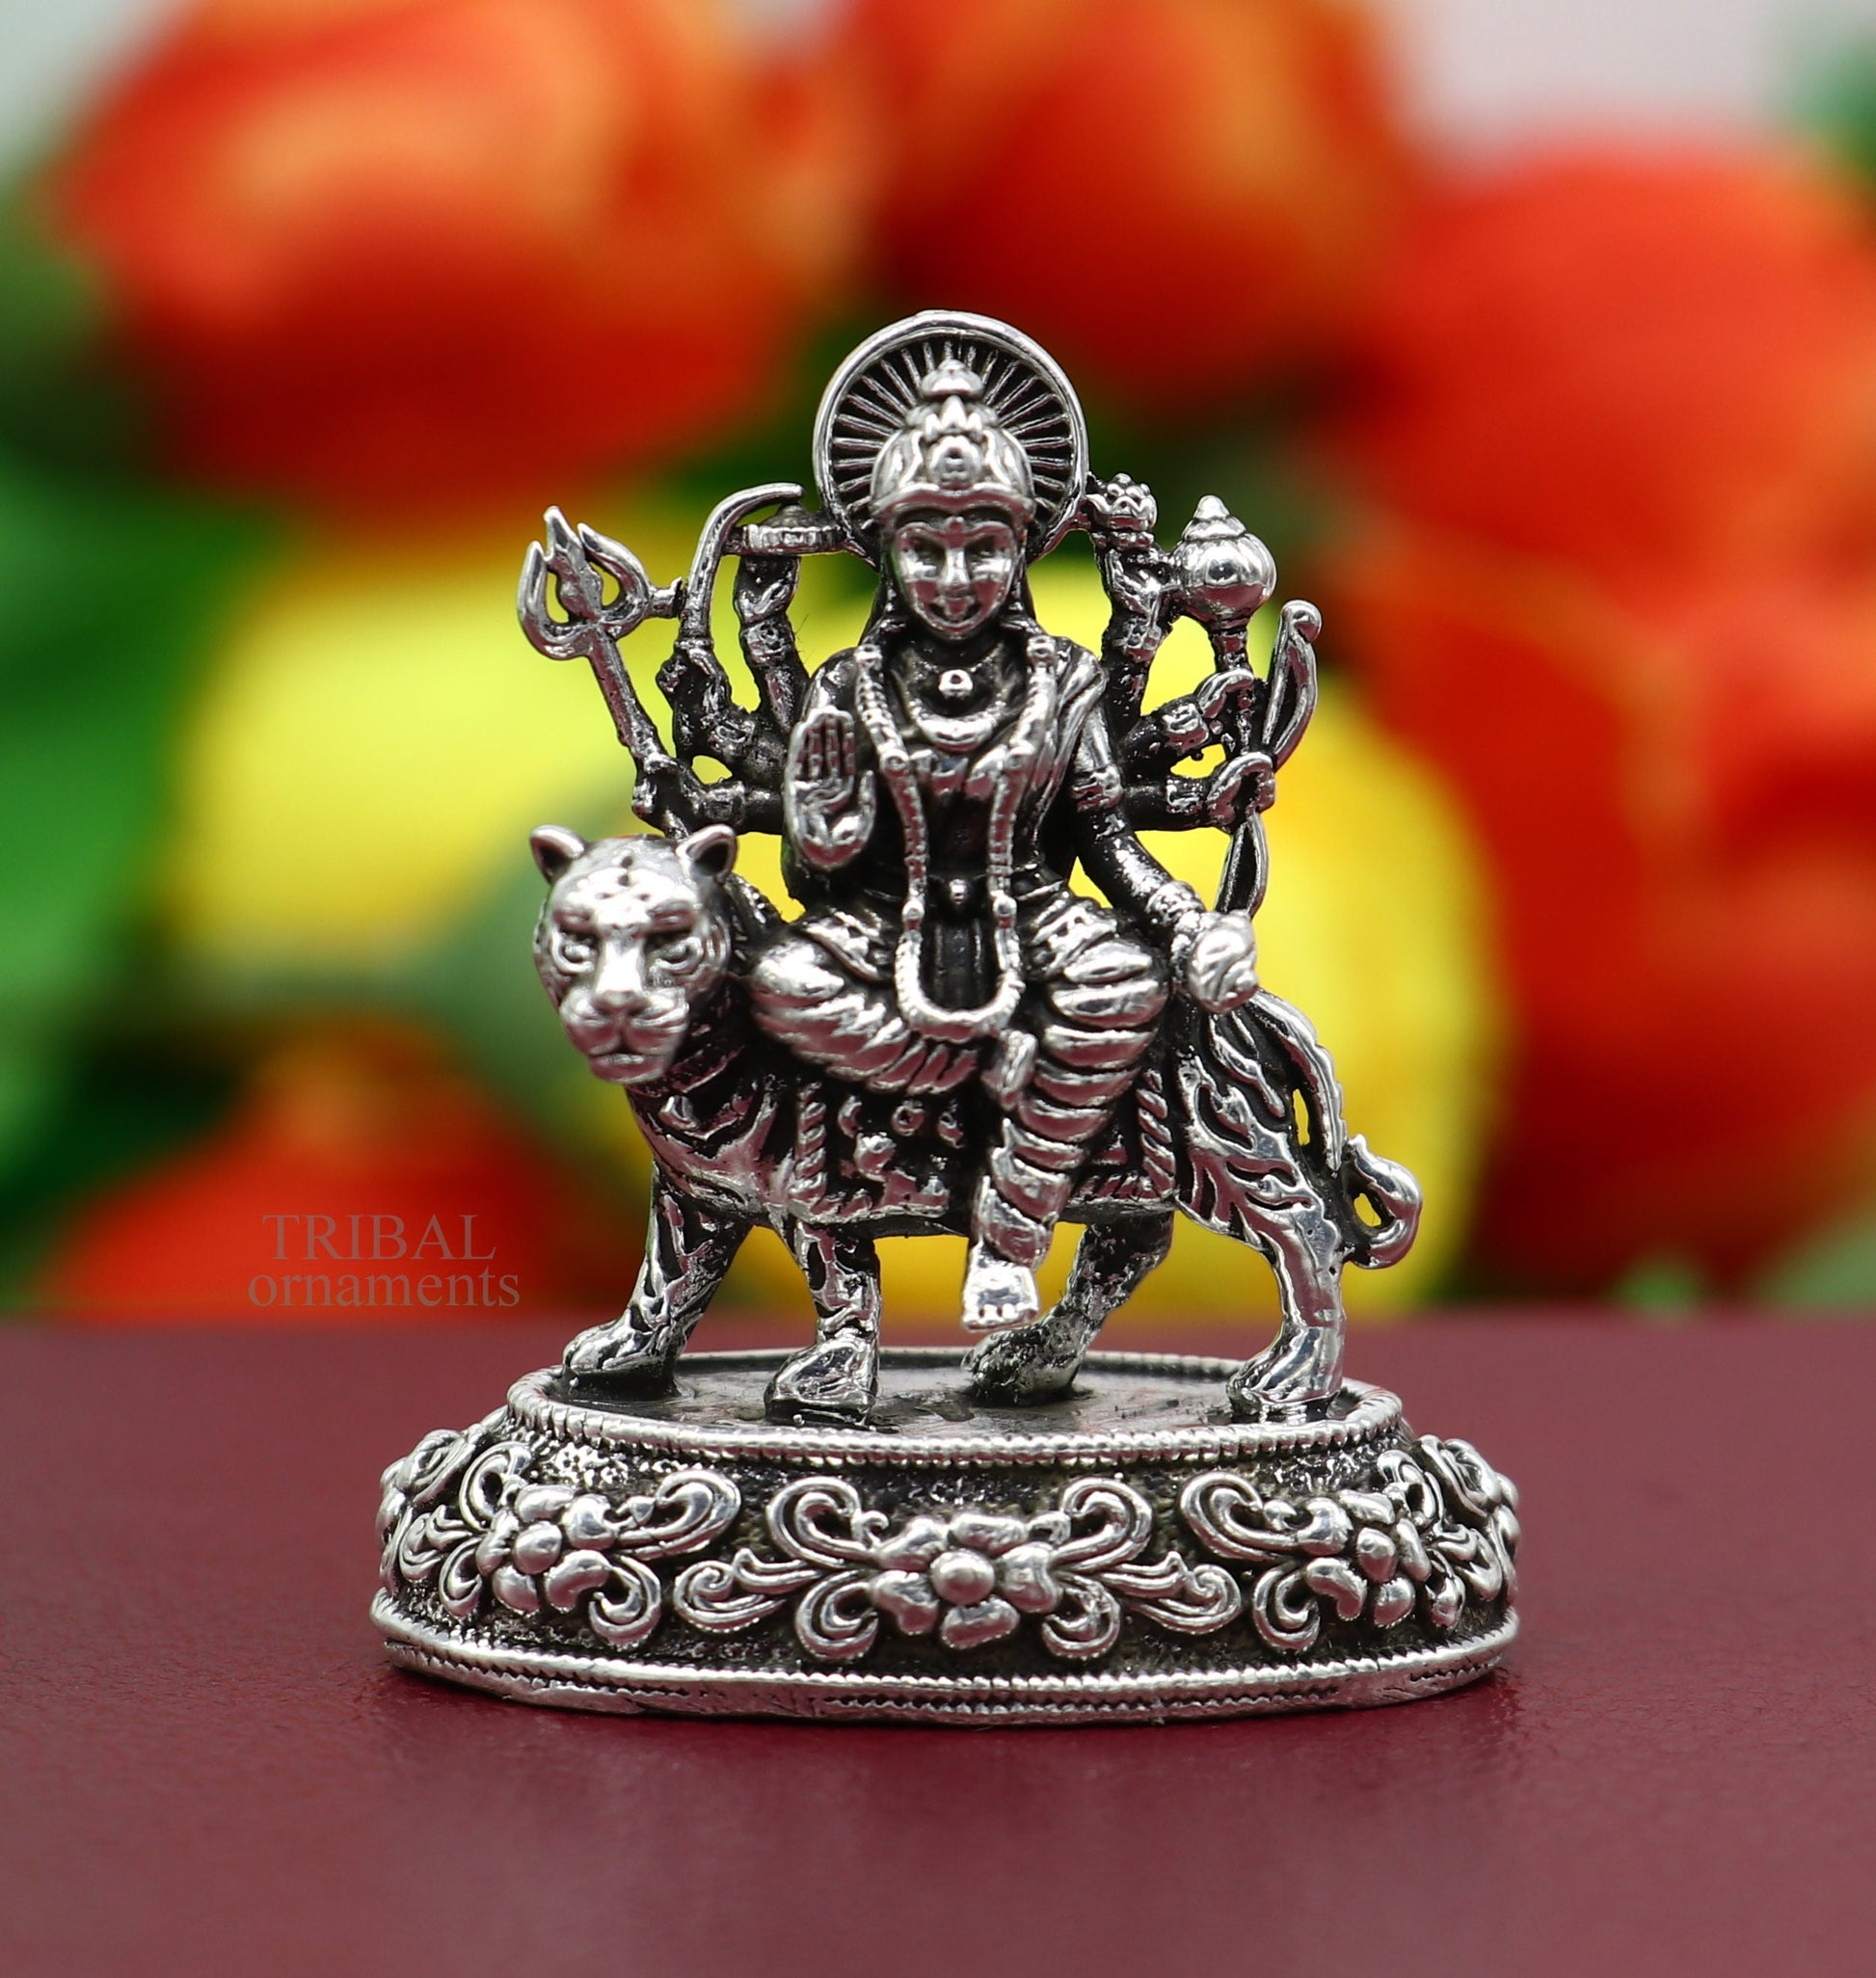 925 Sterling silver Goddess durga/bhawani maa, Pooja Articles statue, handcrafted decorative statue sculpture amazing gifting Art489 - TRIBAL ORNAMENTS